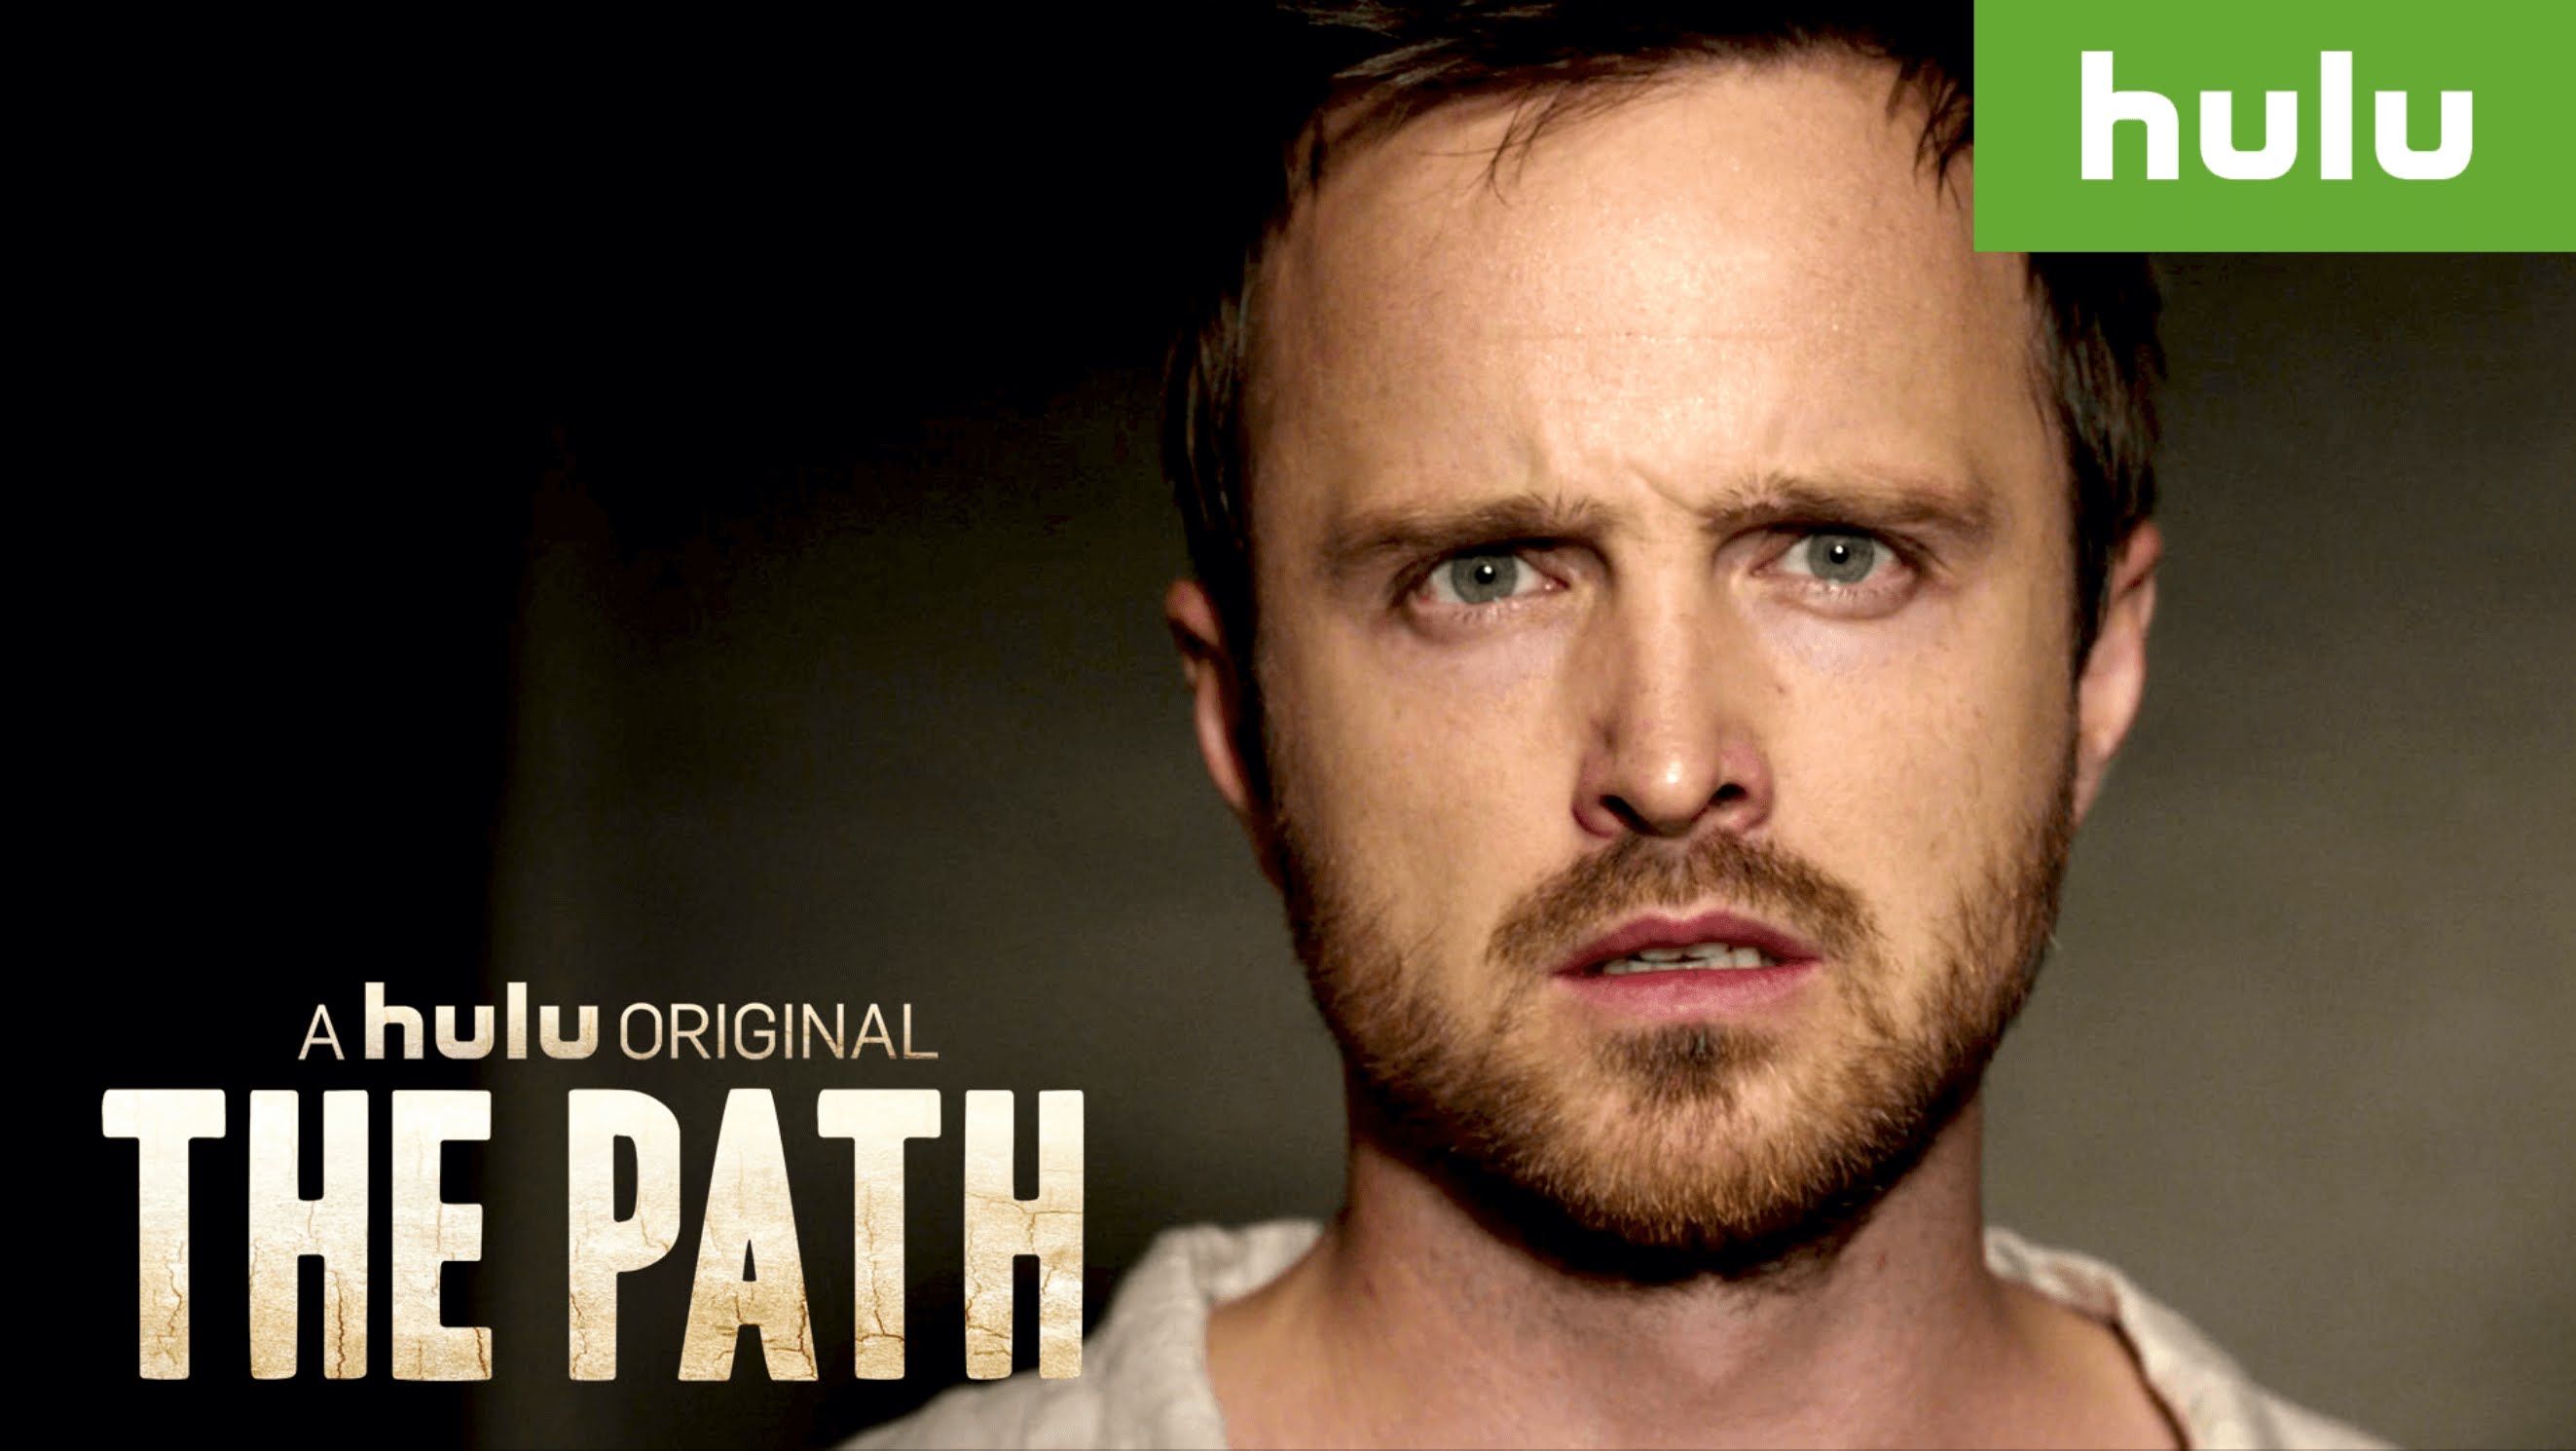 The Path on Hulu Teaser Trailer #1 (Official) - YouTube